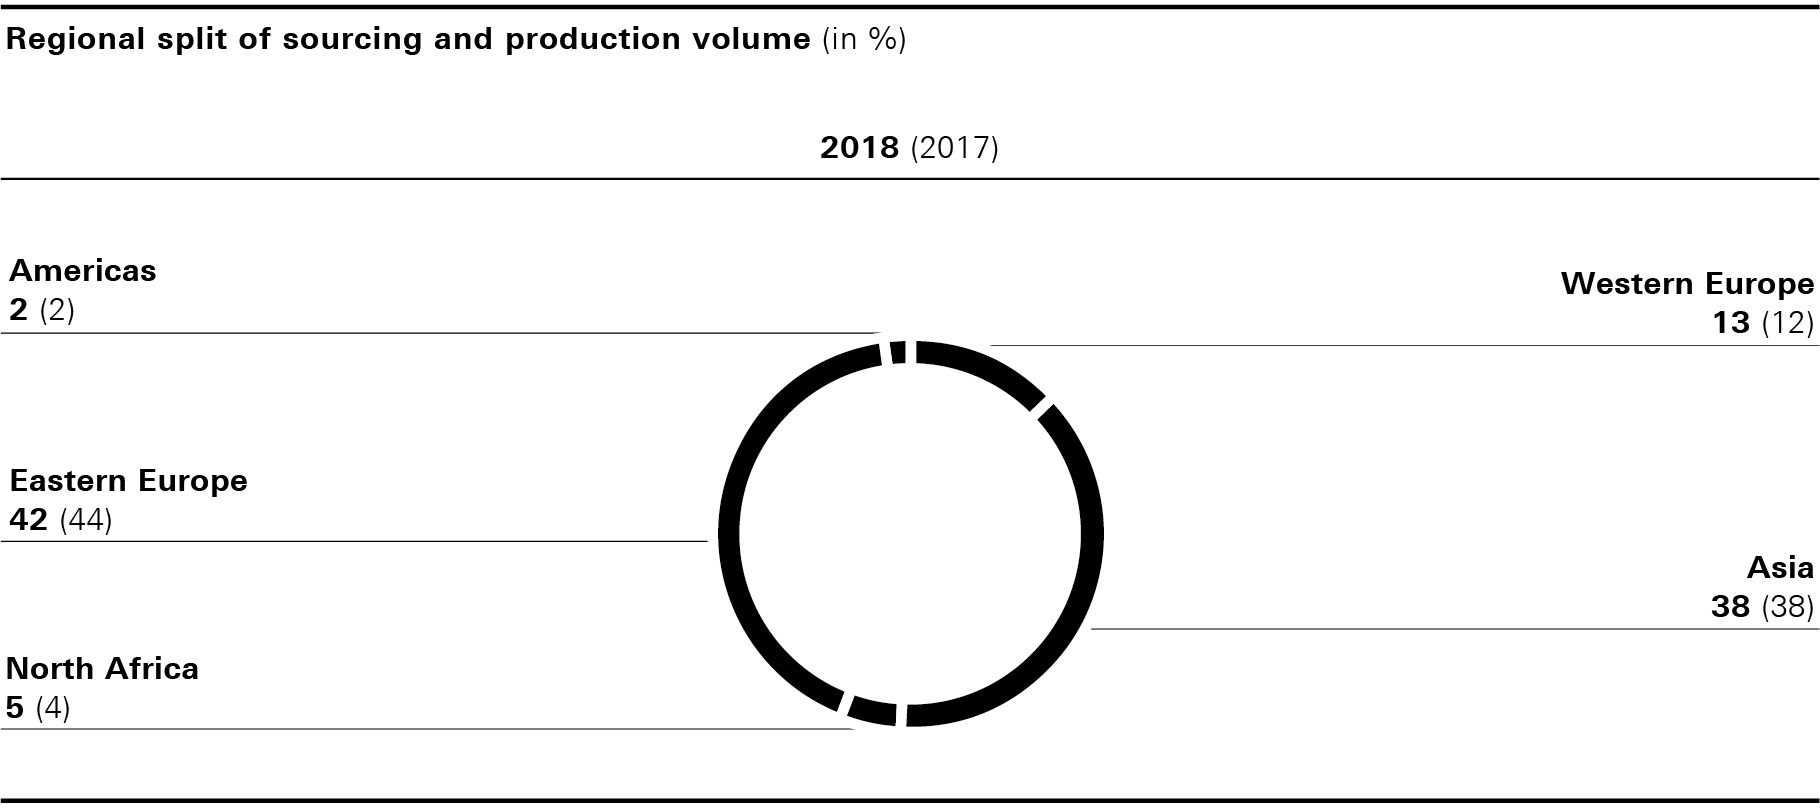 Regional split of sourcing and production volume (pie chart)